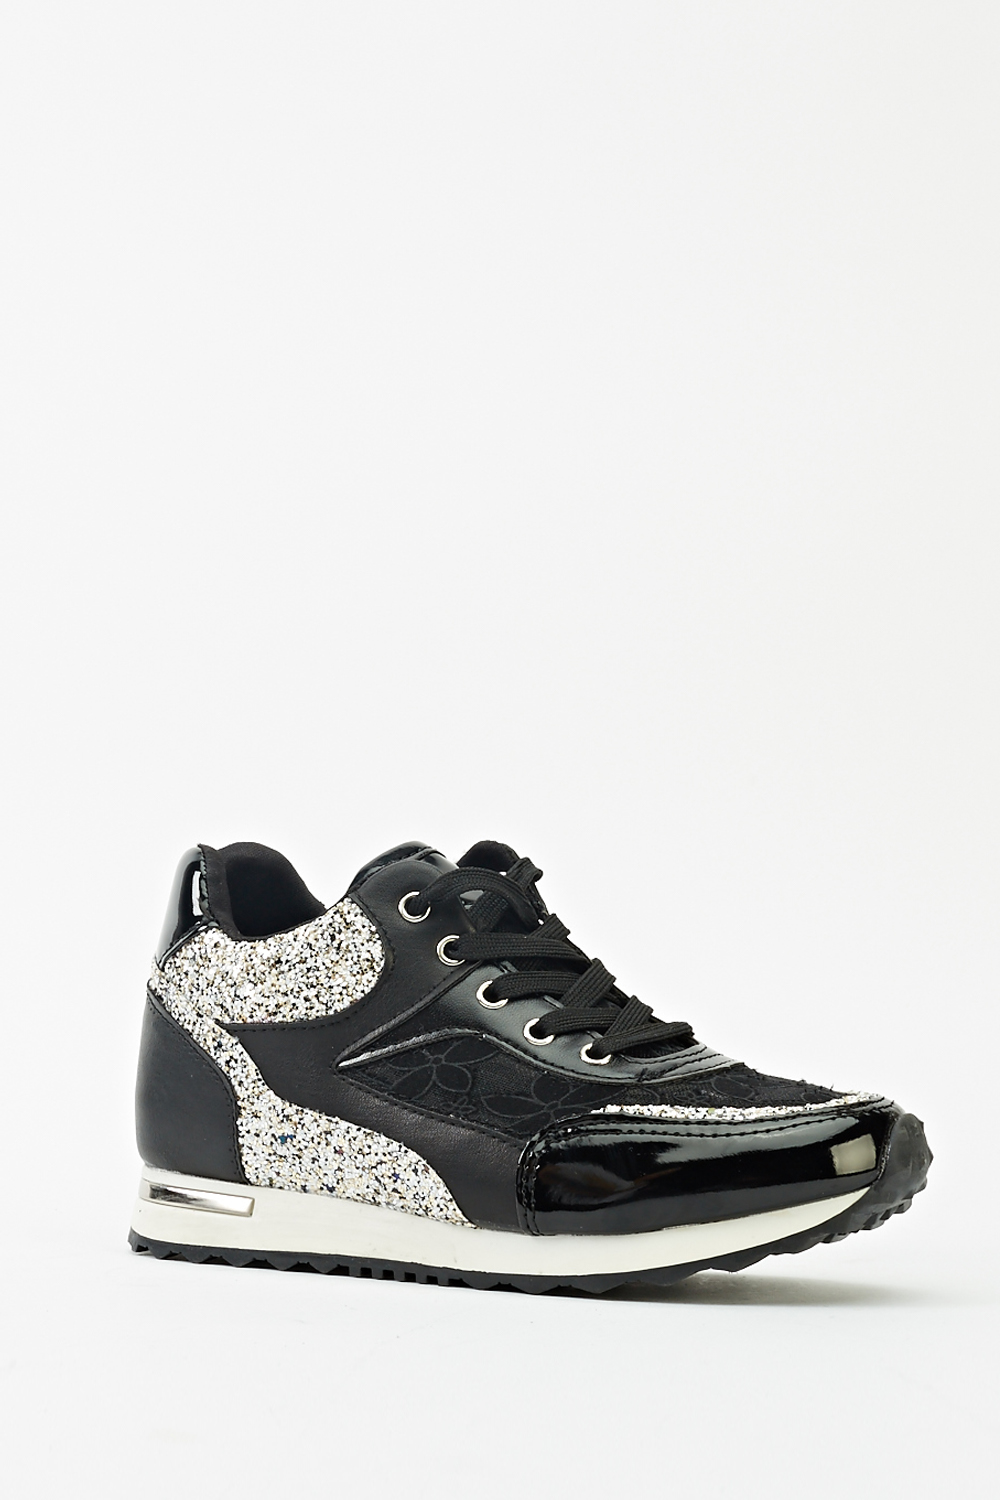 Glitter Embellished Low Top Black Trainers - Just $7